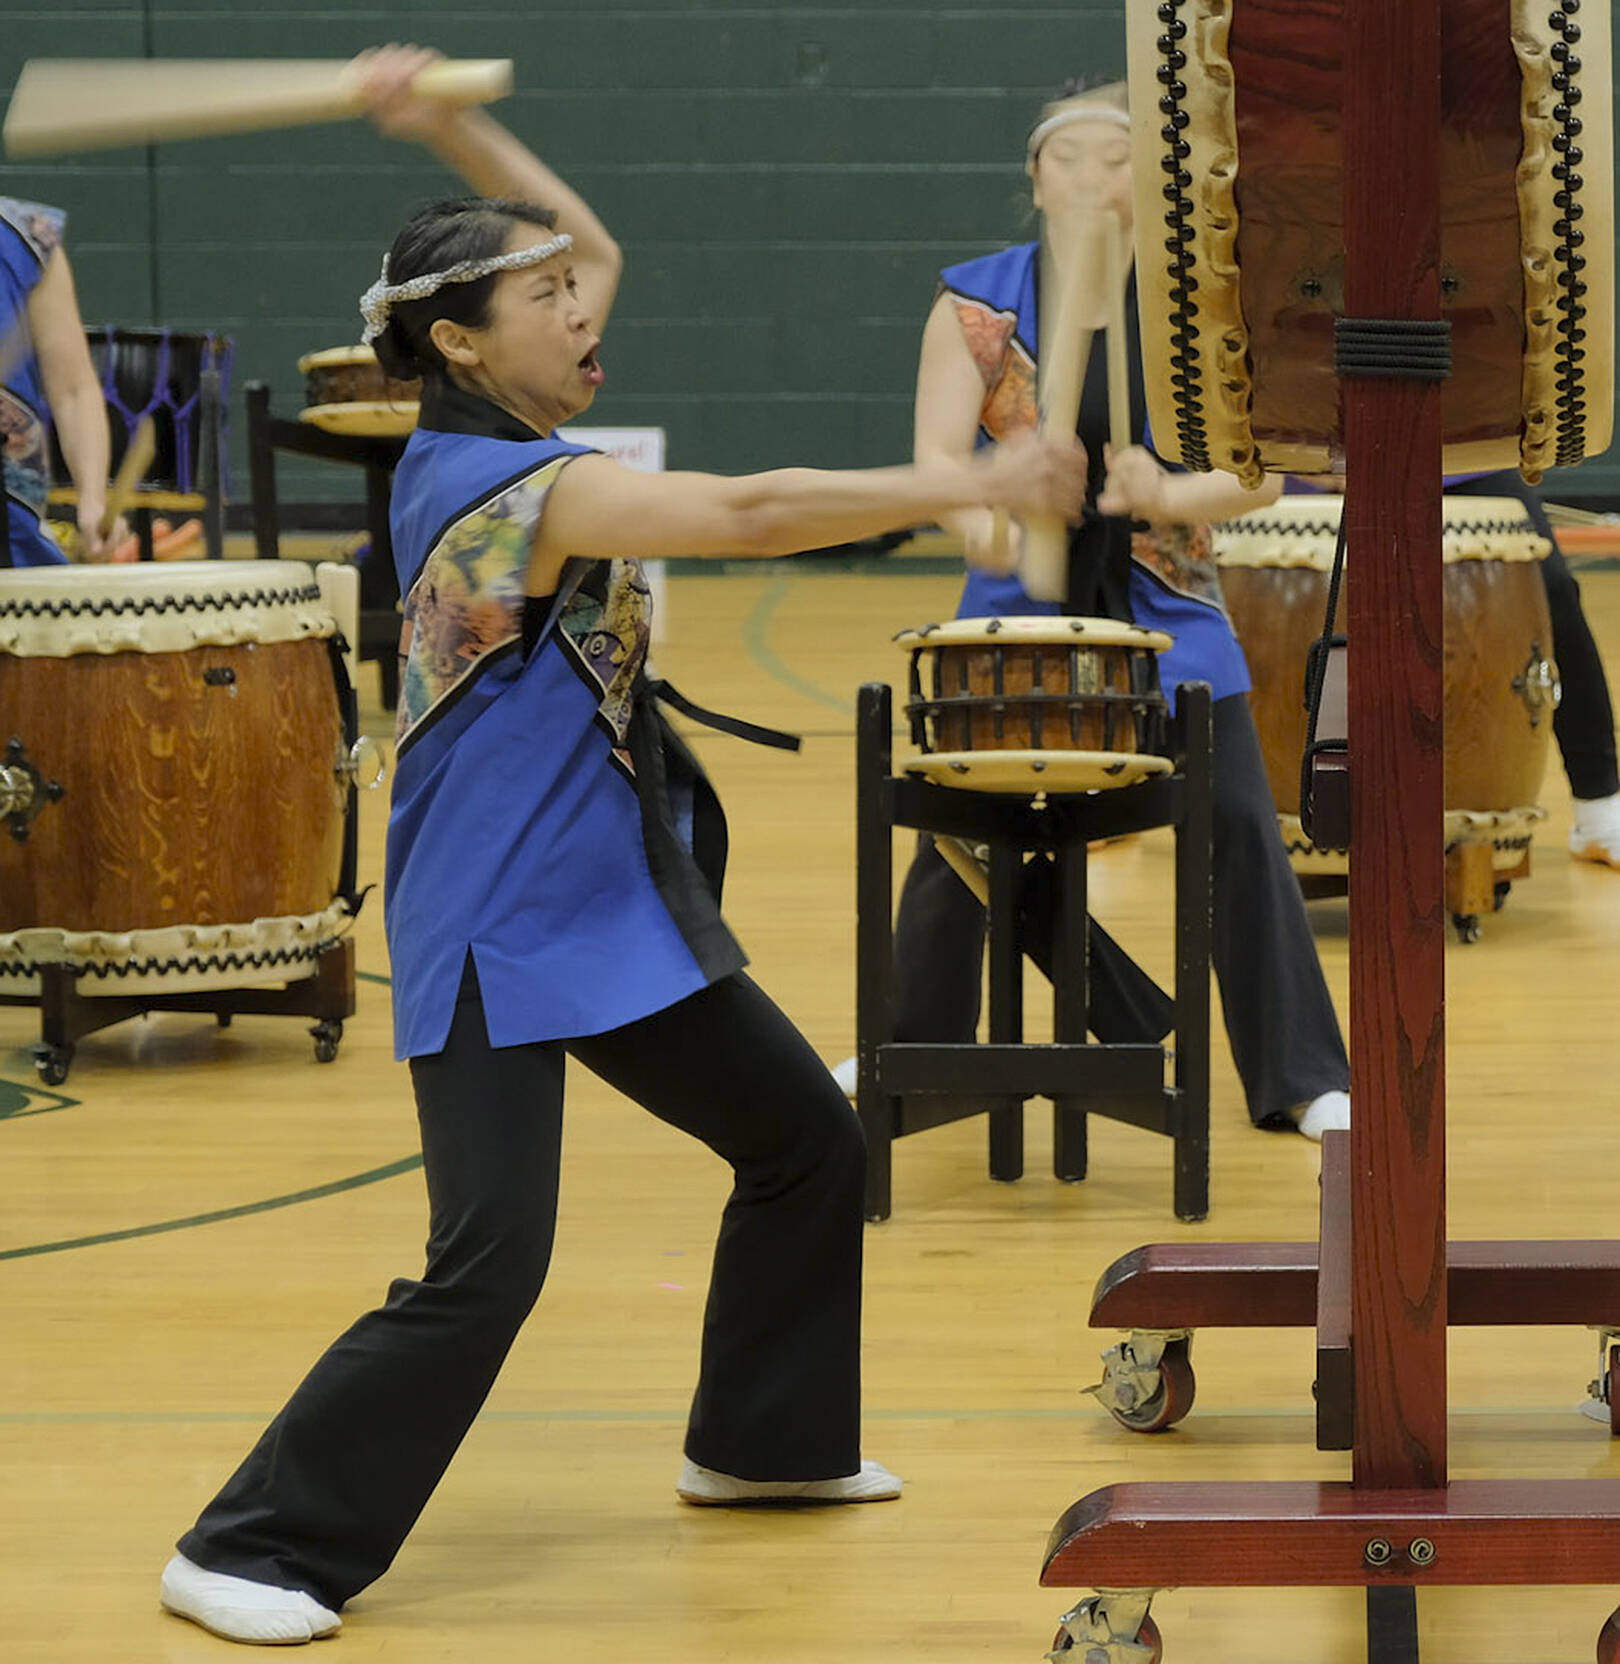 Over 1,500 people watched the Taiko drummers from Seattle perform.